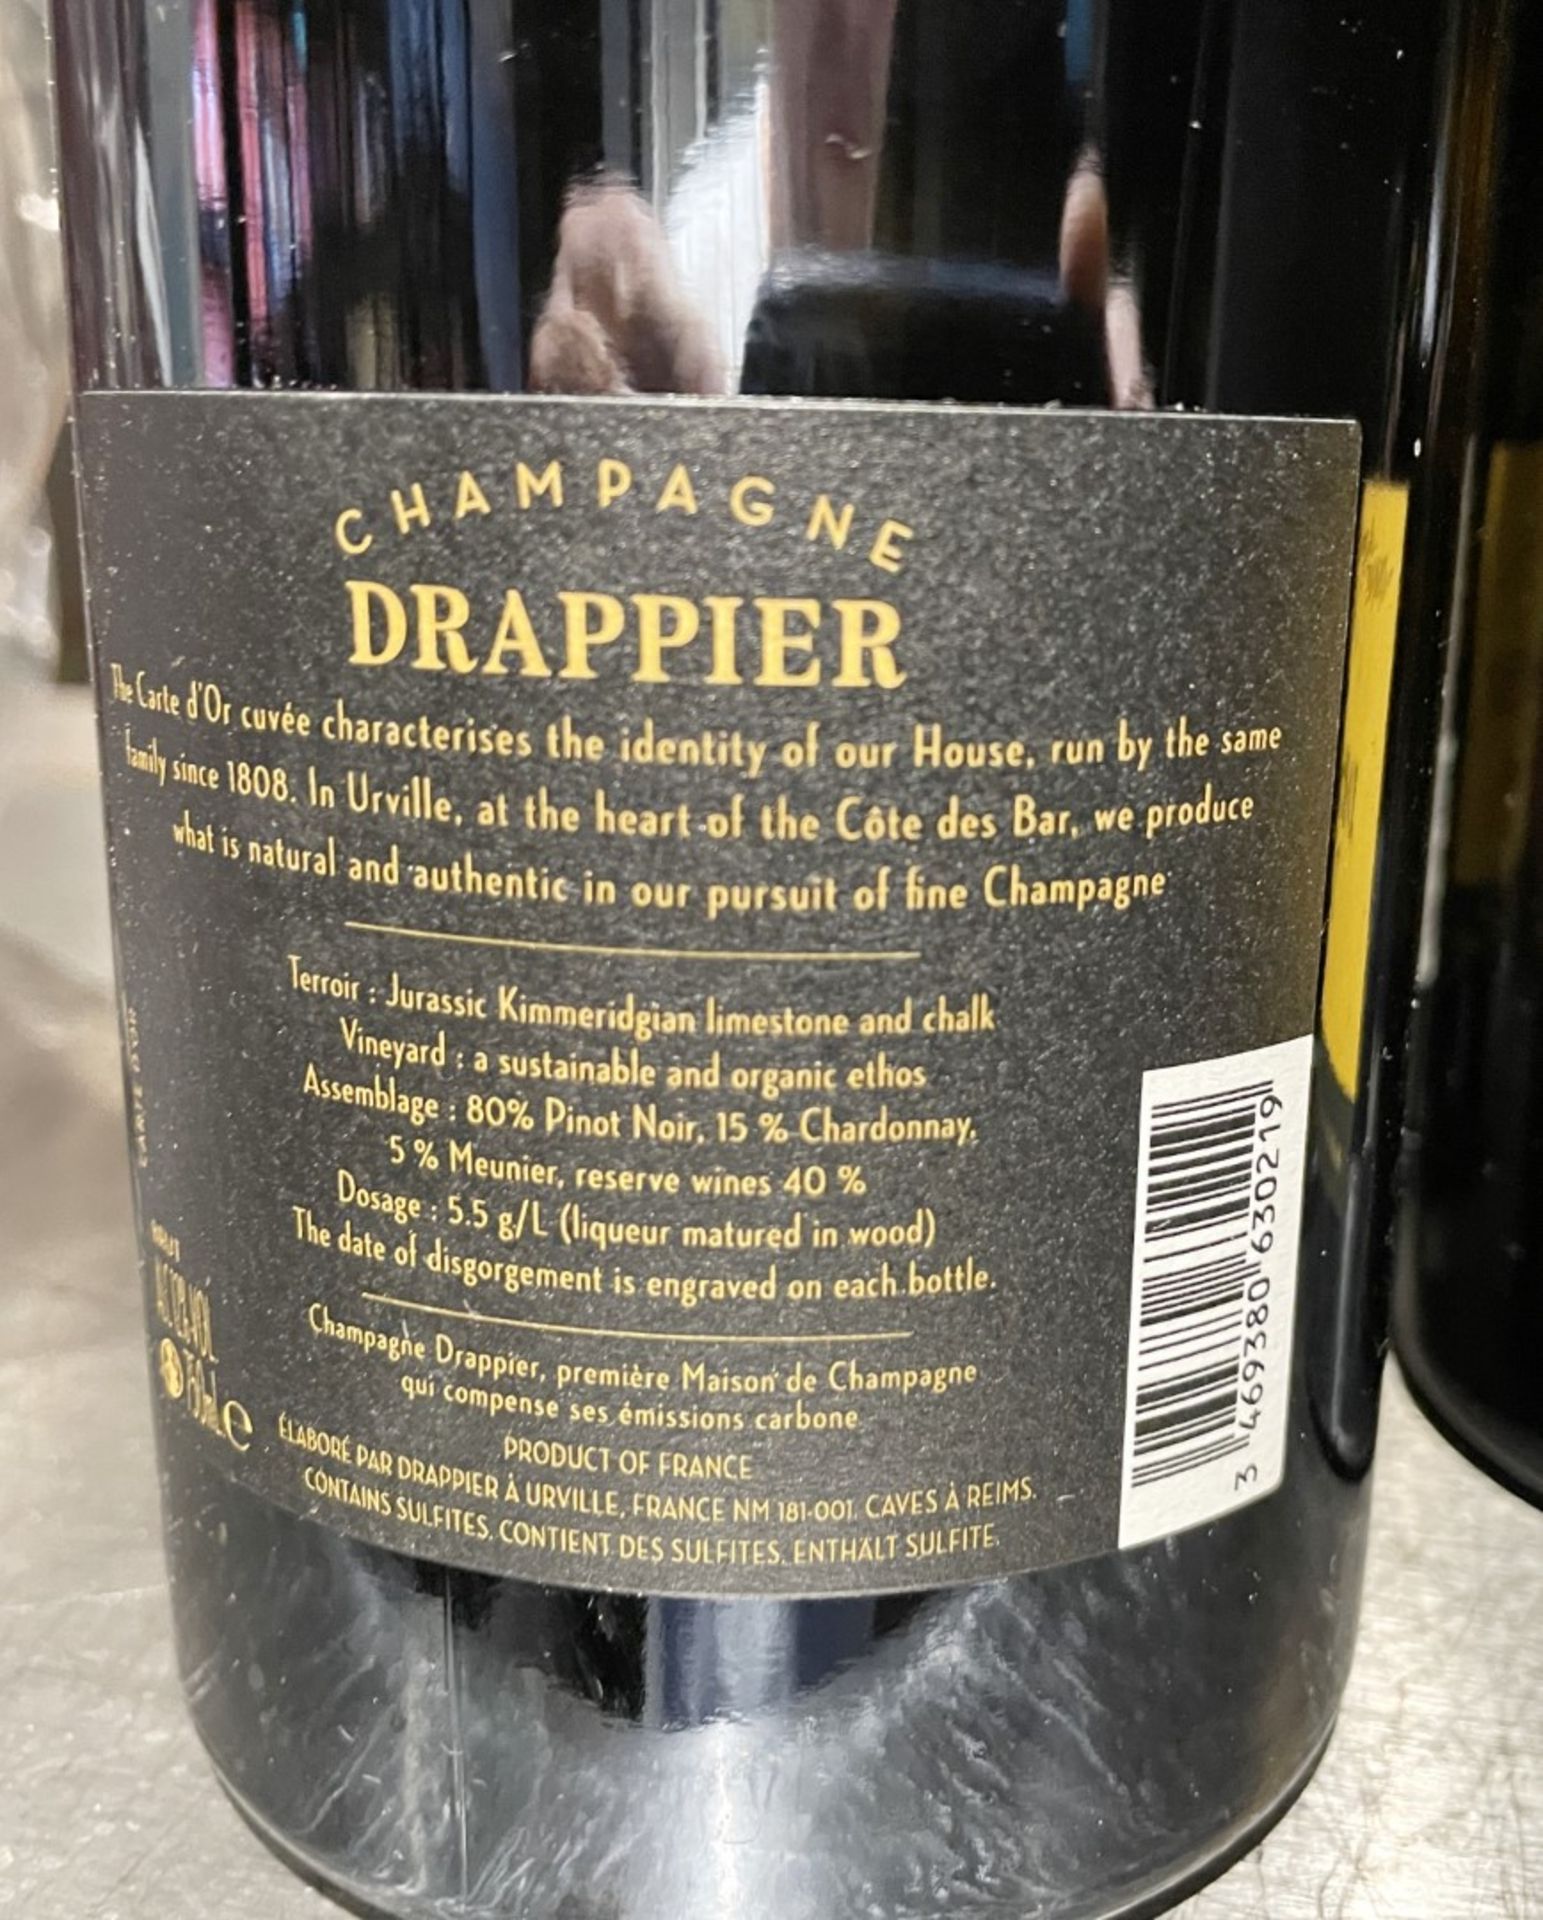 3 x Bottles of 750ml Drappier Champagne - New Unopened Bottles - Image 5 of 9